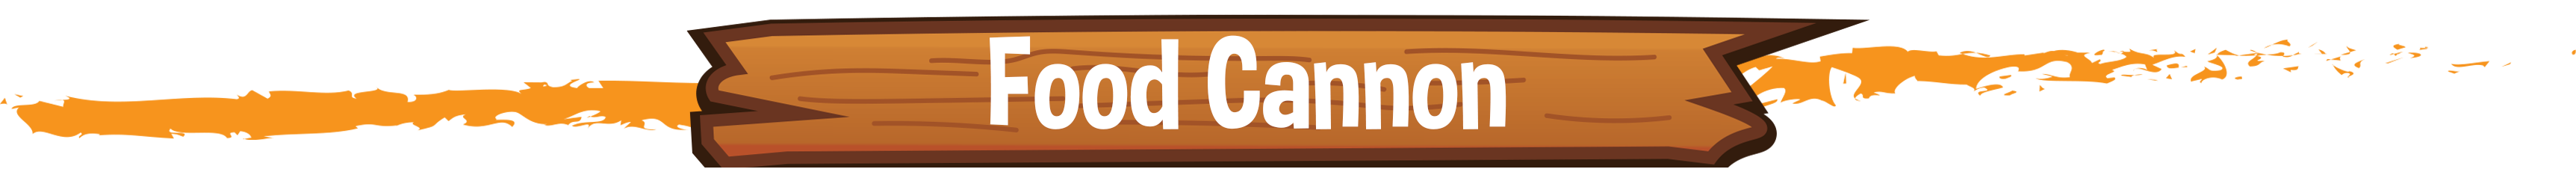 Food Cannon